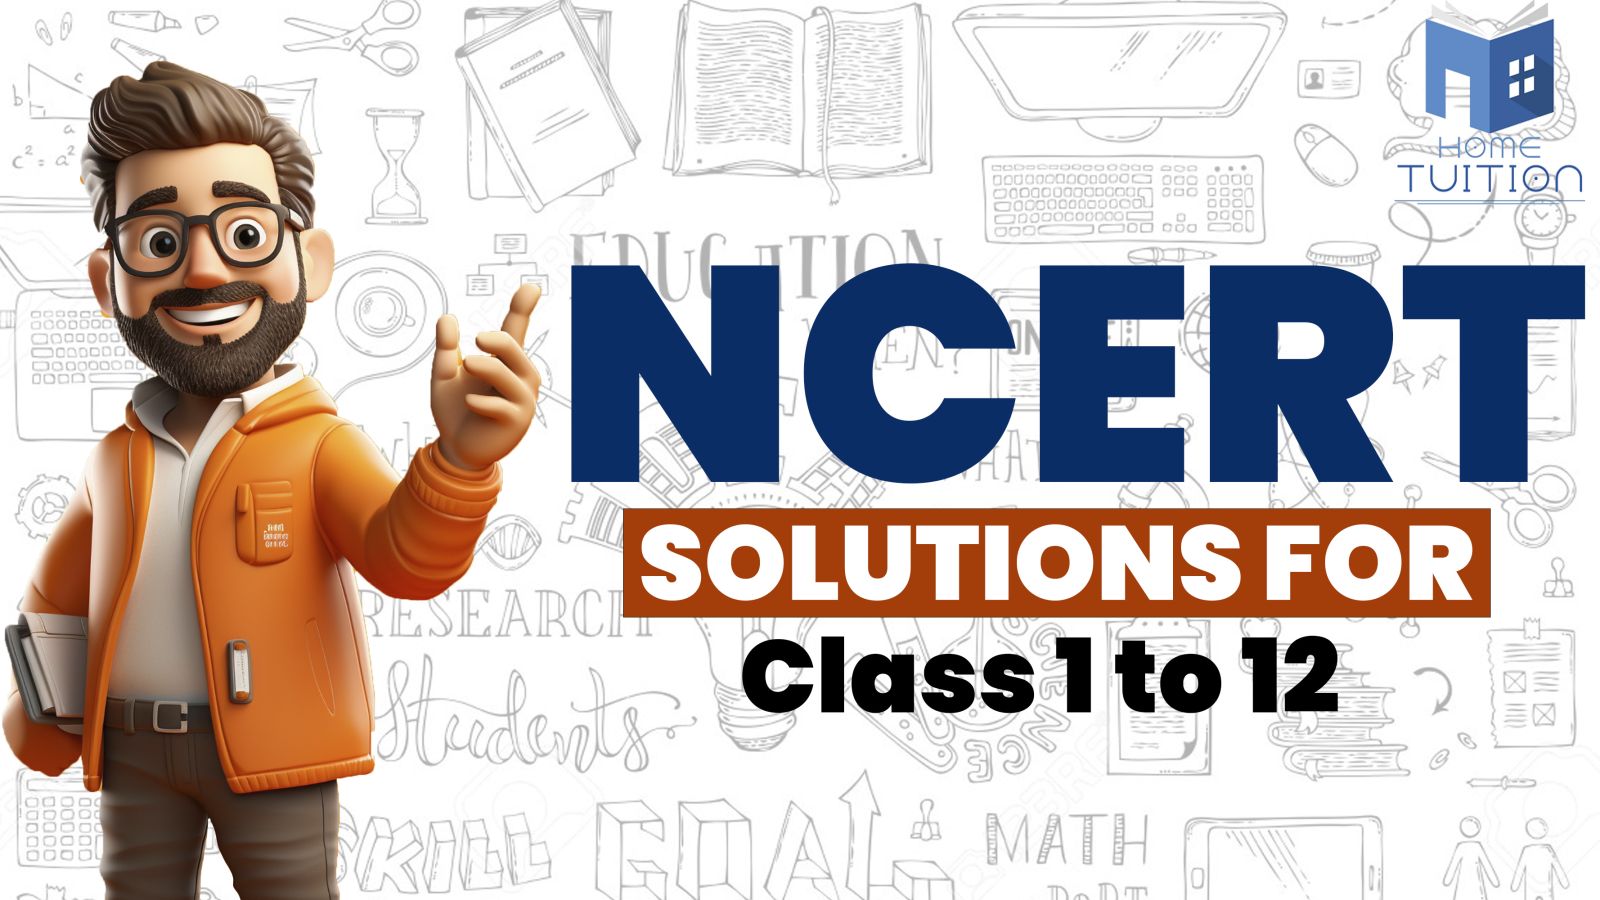 NCERT Solutions for Class 1 to 12